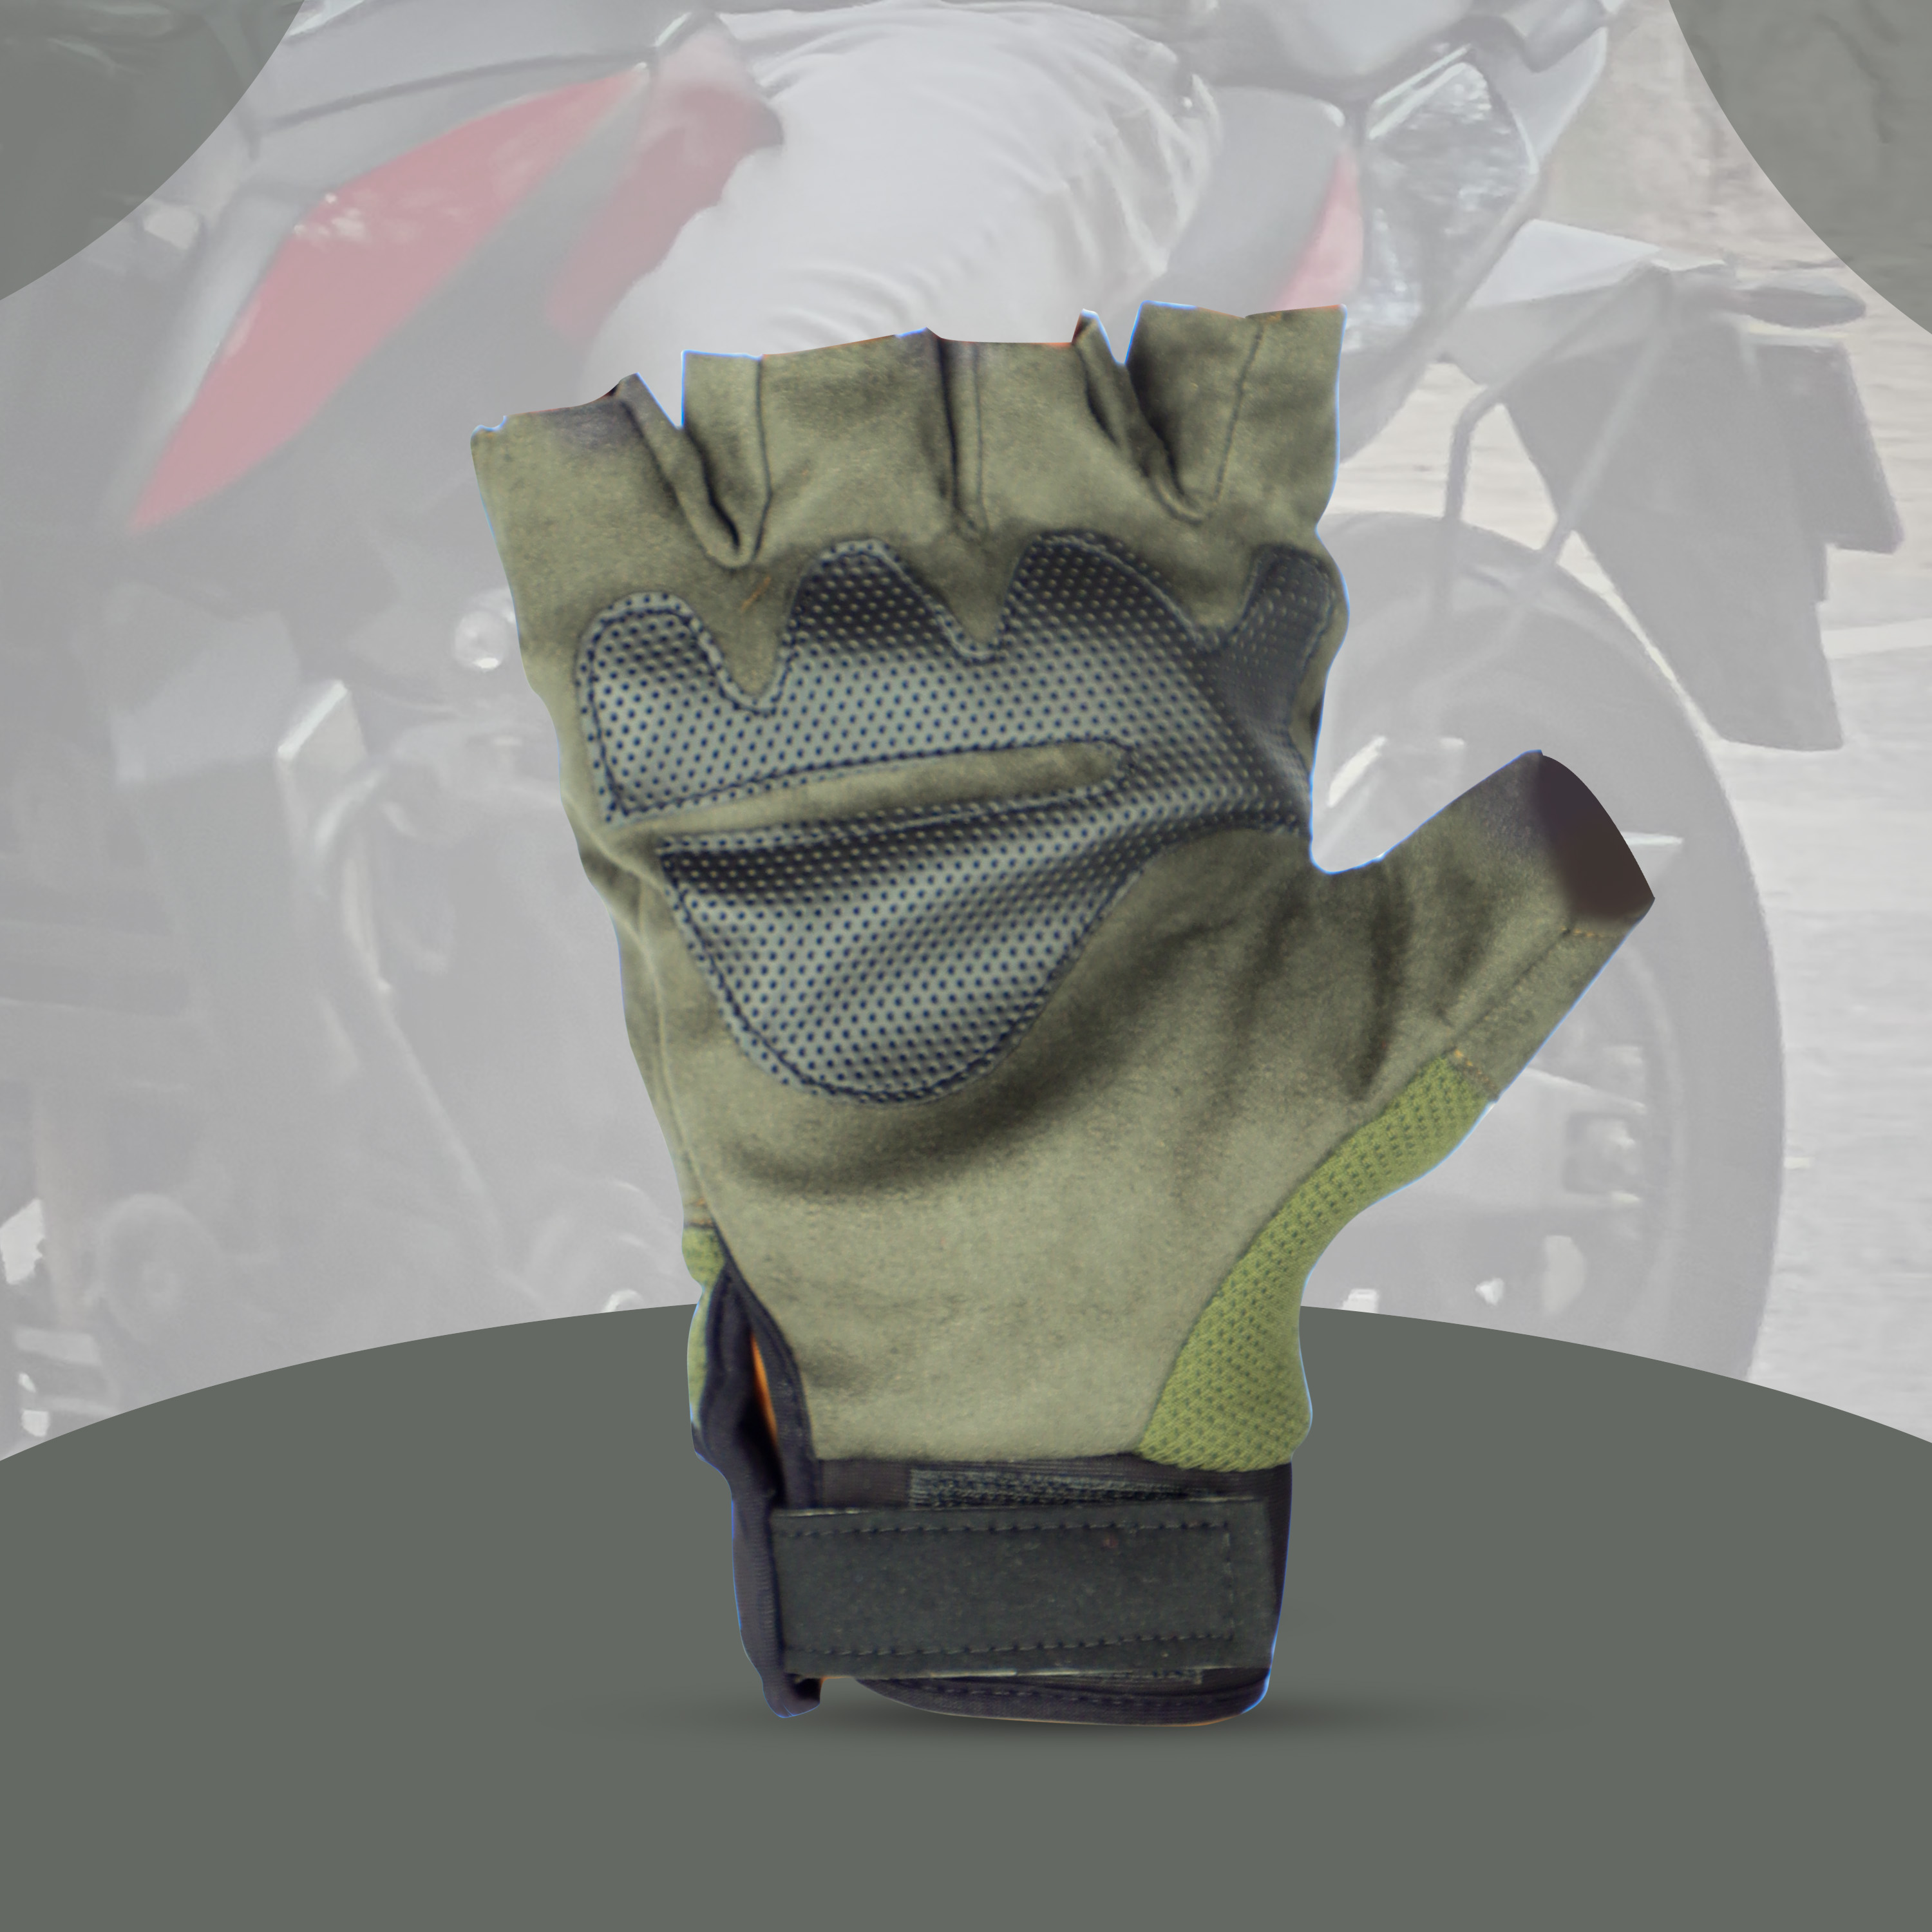 Steelbird Experience 1.0 Reflective Half Finger Bike Riding Gloves With Touch Screen Sensitivity At Thumb And Index Finger, Protective Off-Road Motorbike Racing (Green)